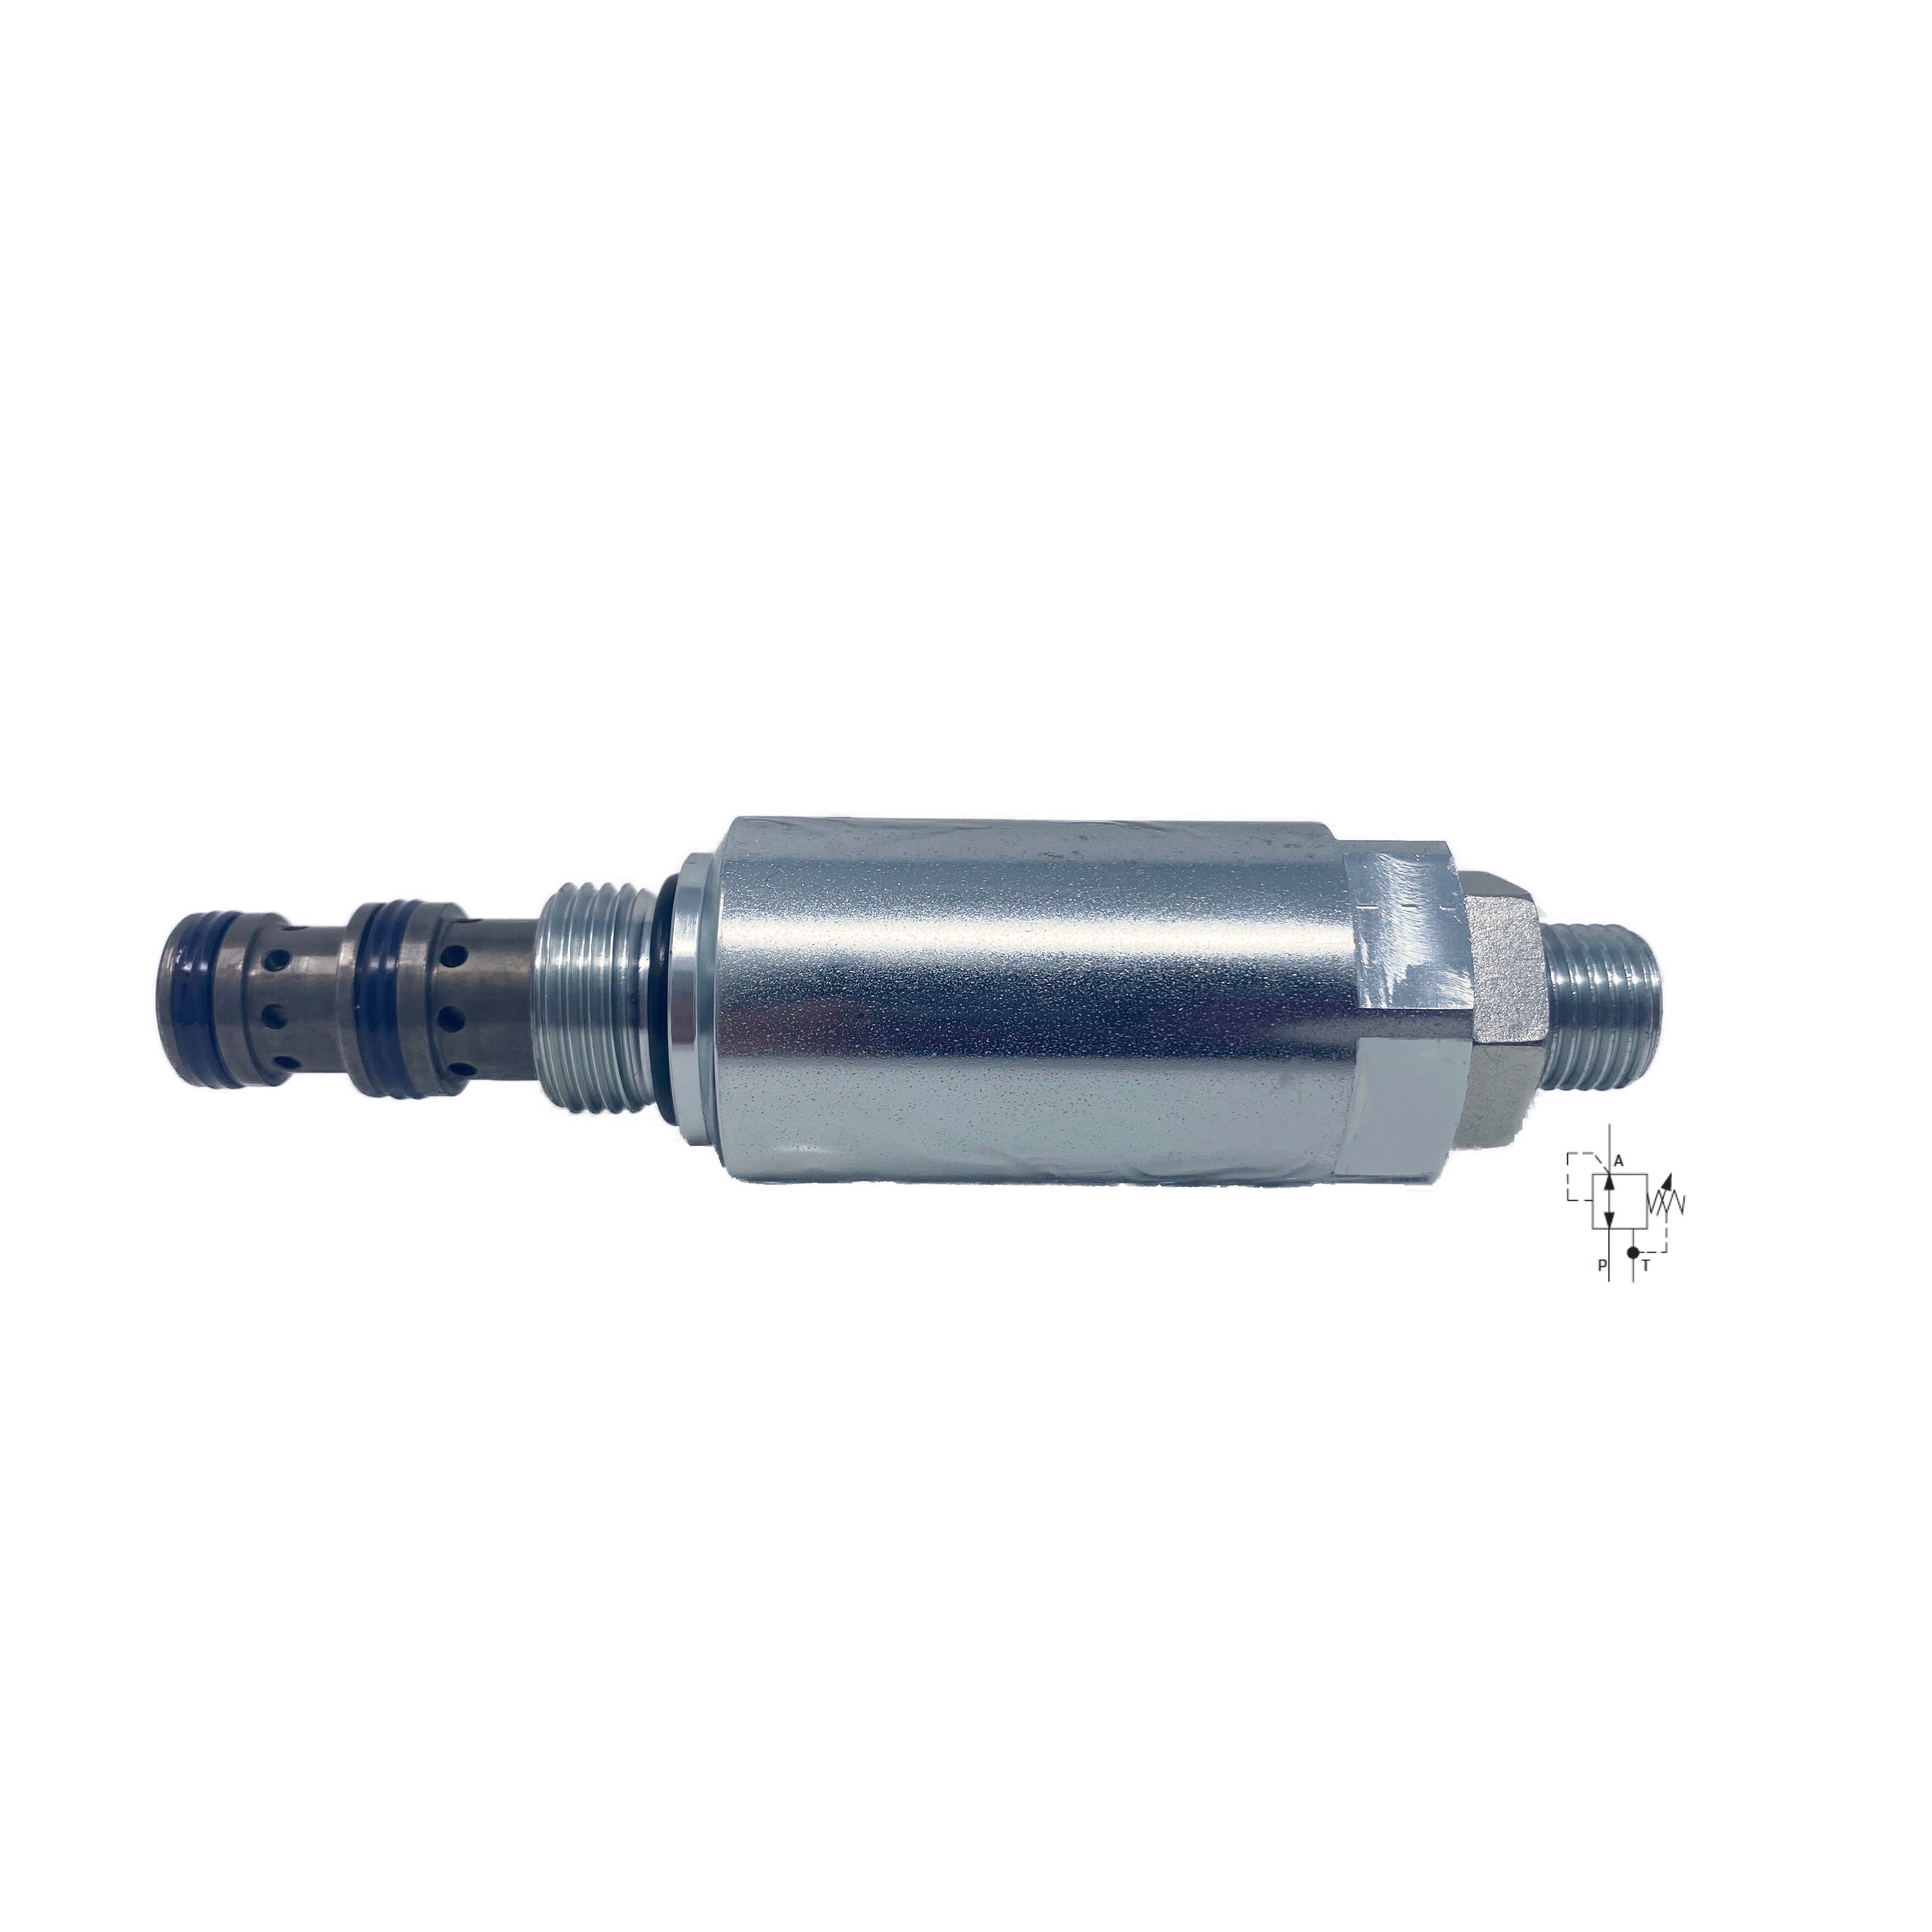 SP2A-A3/L16S-A : Argo Pressure Reducing-Relieving Valve, Spool Type, Direct Acting, 5 GPM, 5100psi rated, 730-2320psi  Adj